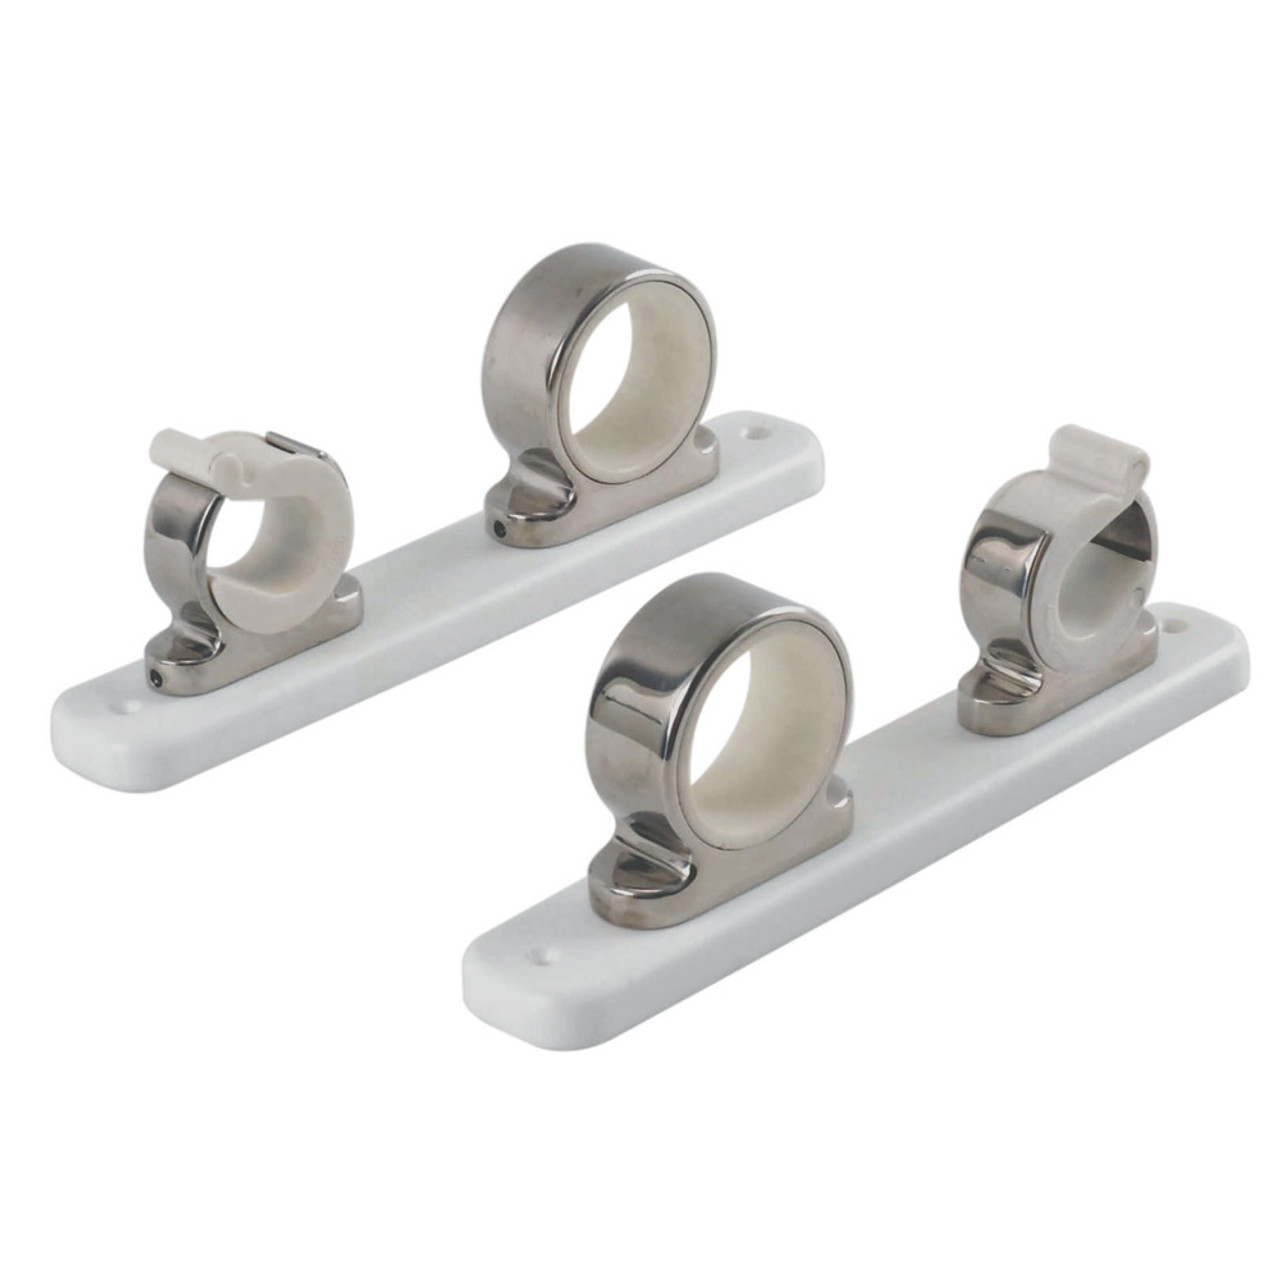 TACO 2-Rod Hanger w\/Poly Rack - Polished Stainless Steel [F16-2751-1]